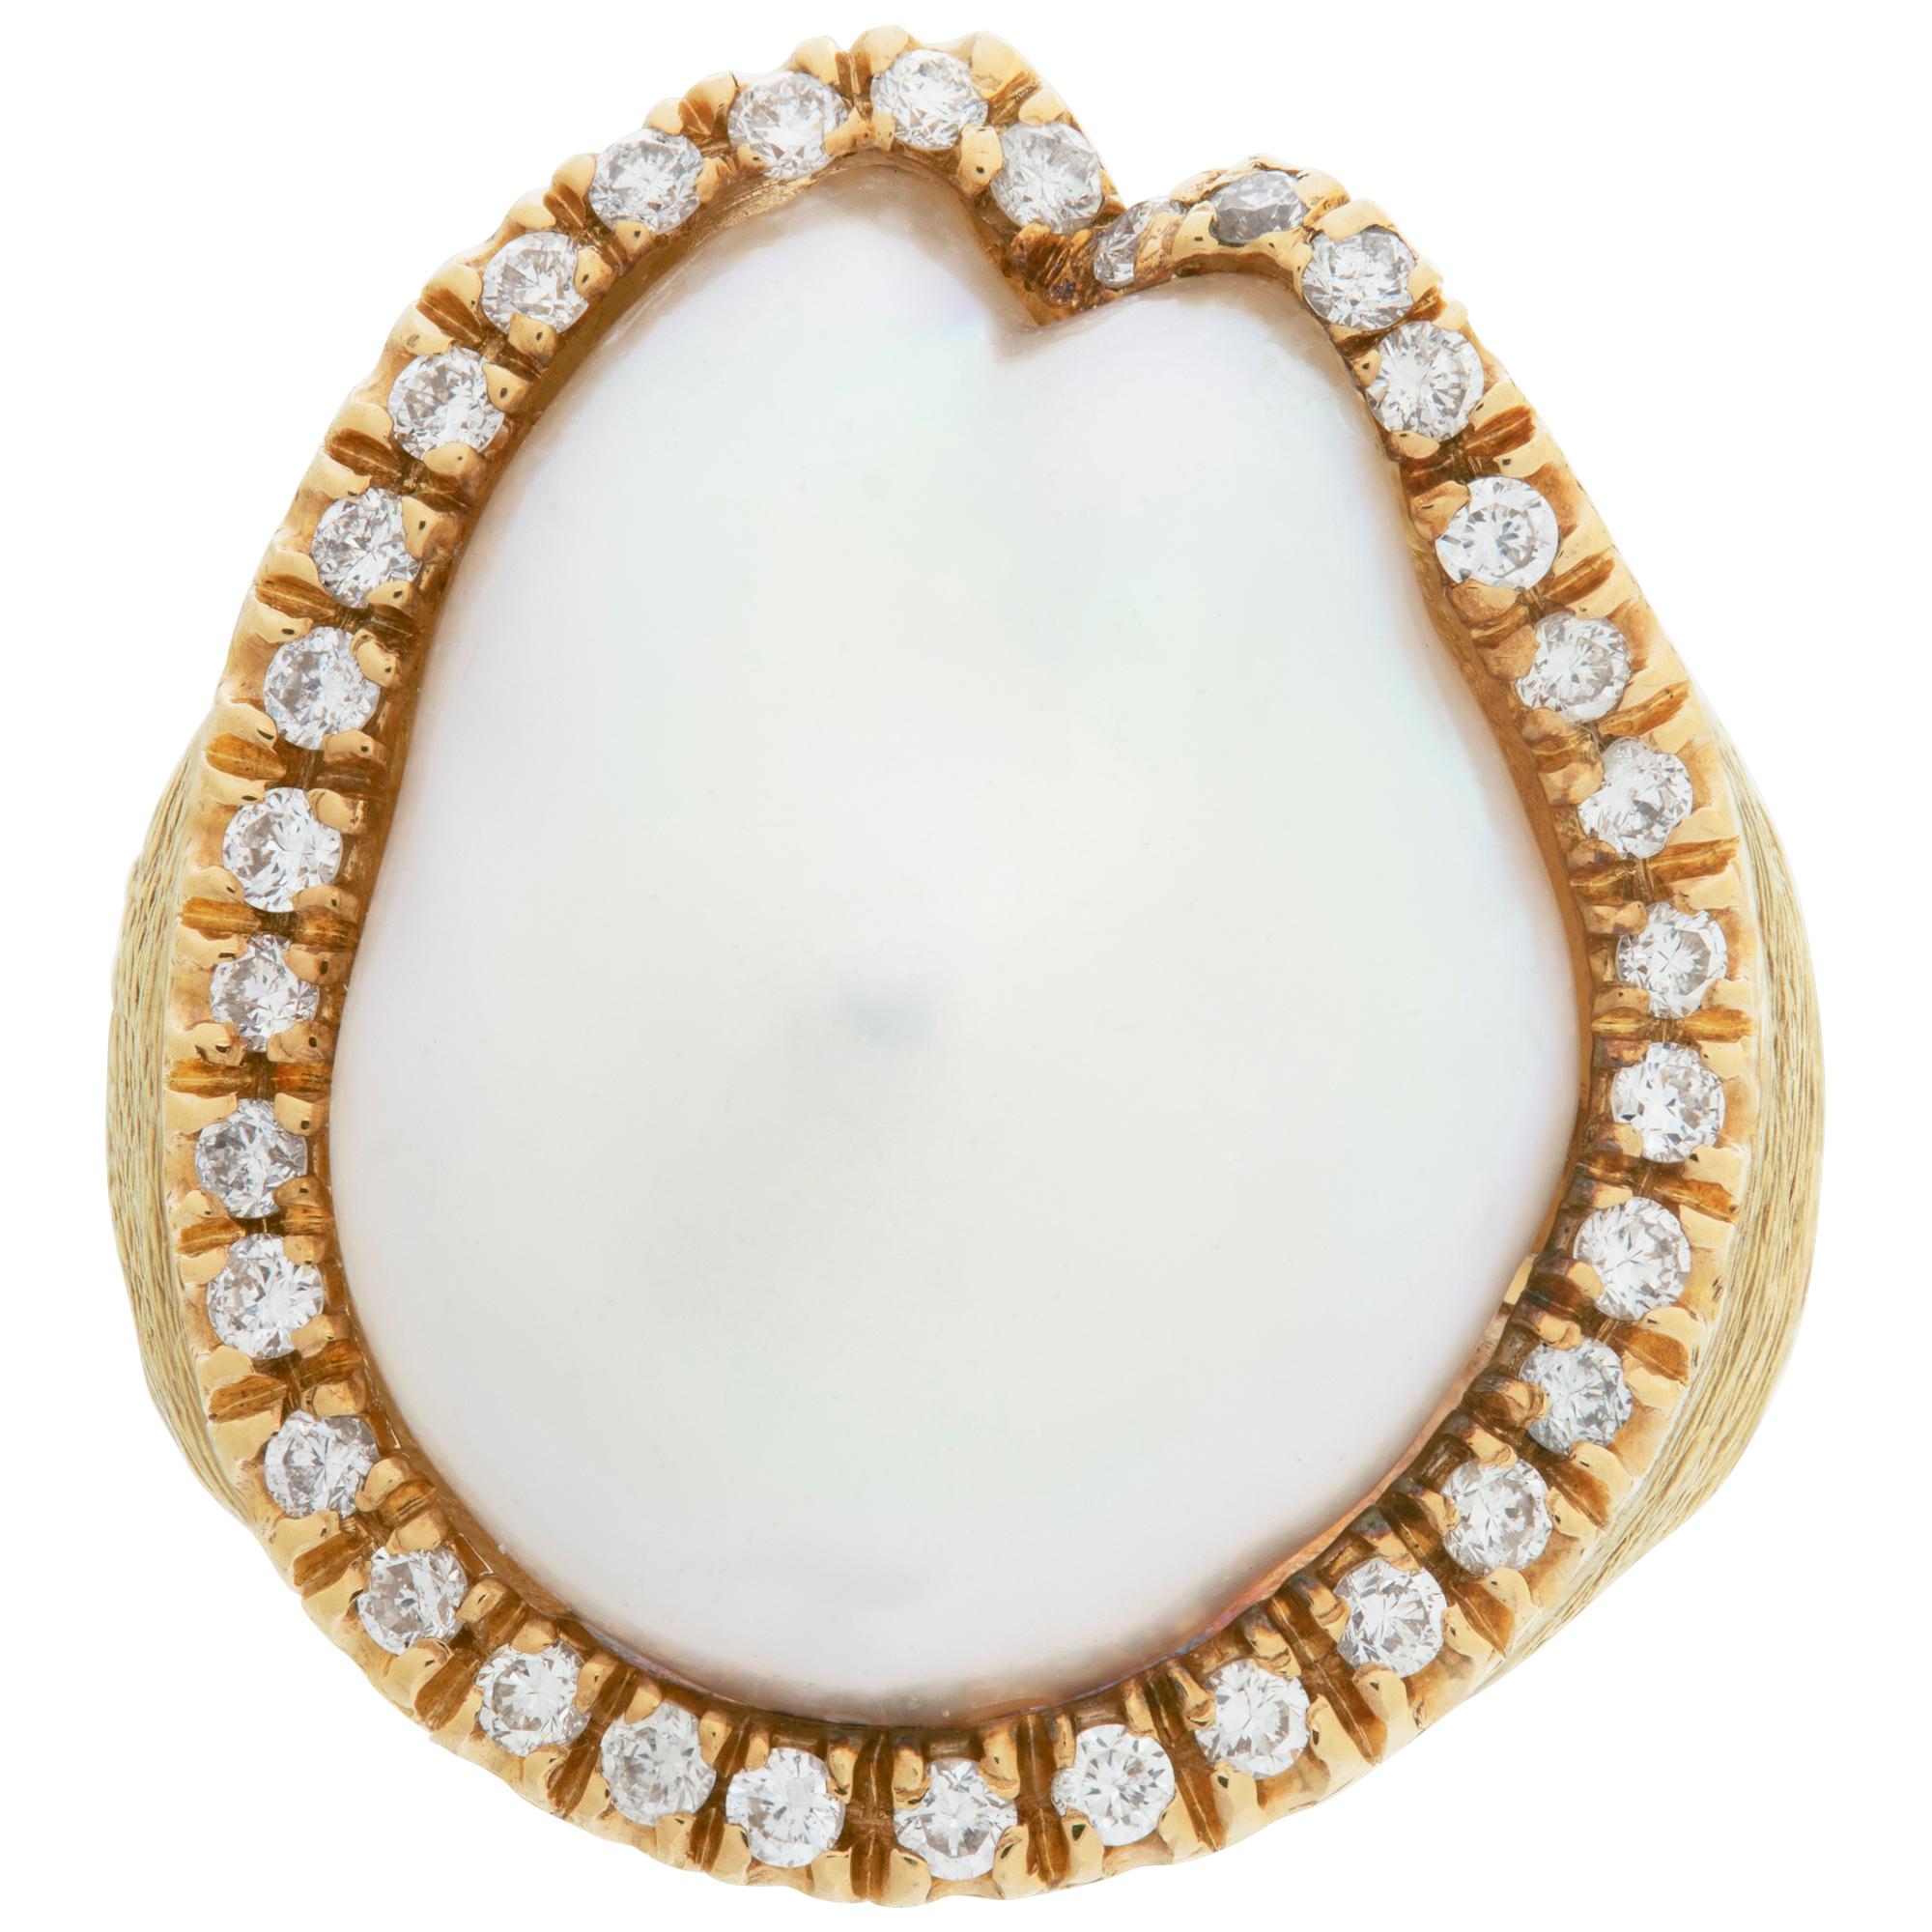 Baroque 17.5 x18mm pearl ring surrounded by 0.50 carat in diamonds in 18k matte yellow gold. Size 5.5, measures 21mm at head, 3.5mm at shank.This Pearl/diamond ring is currently size 5.5 and some items can be sized up or down, please ask! It weighs